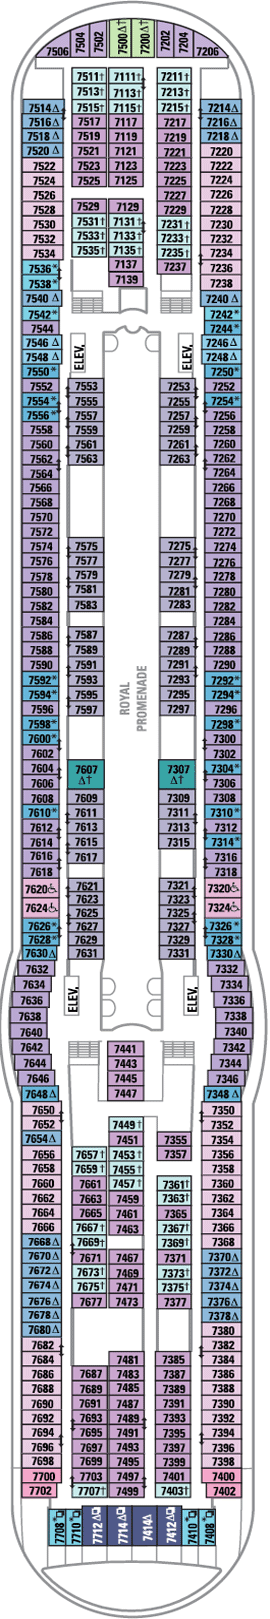 Independence Of The Seas Null Deck Plan